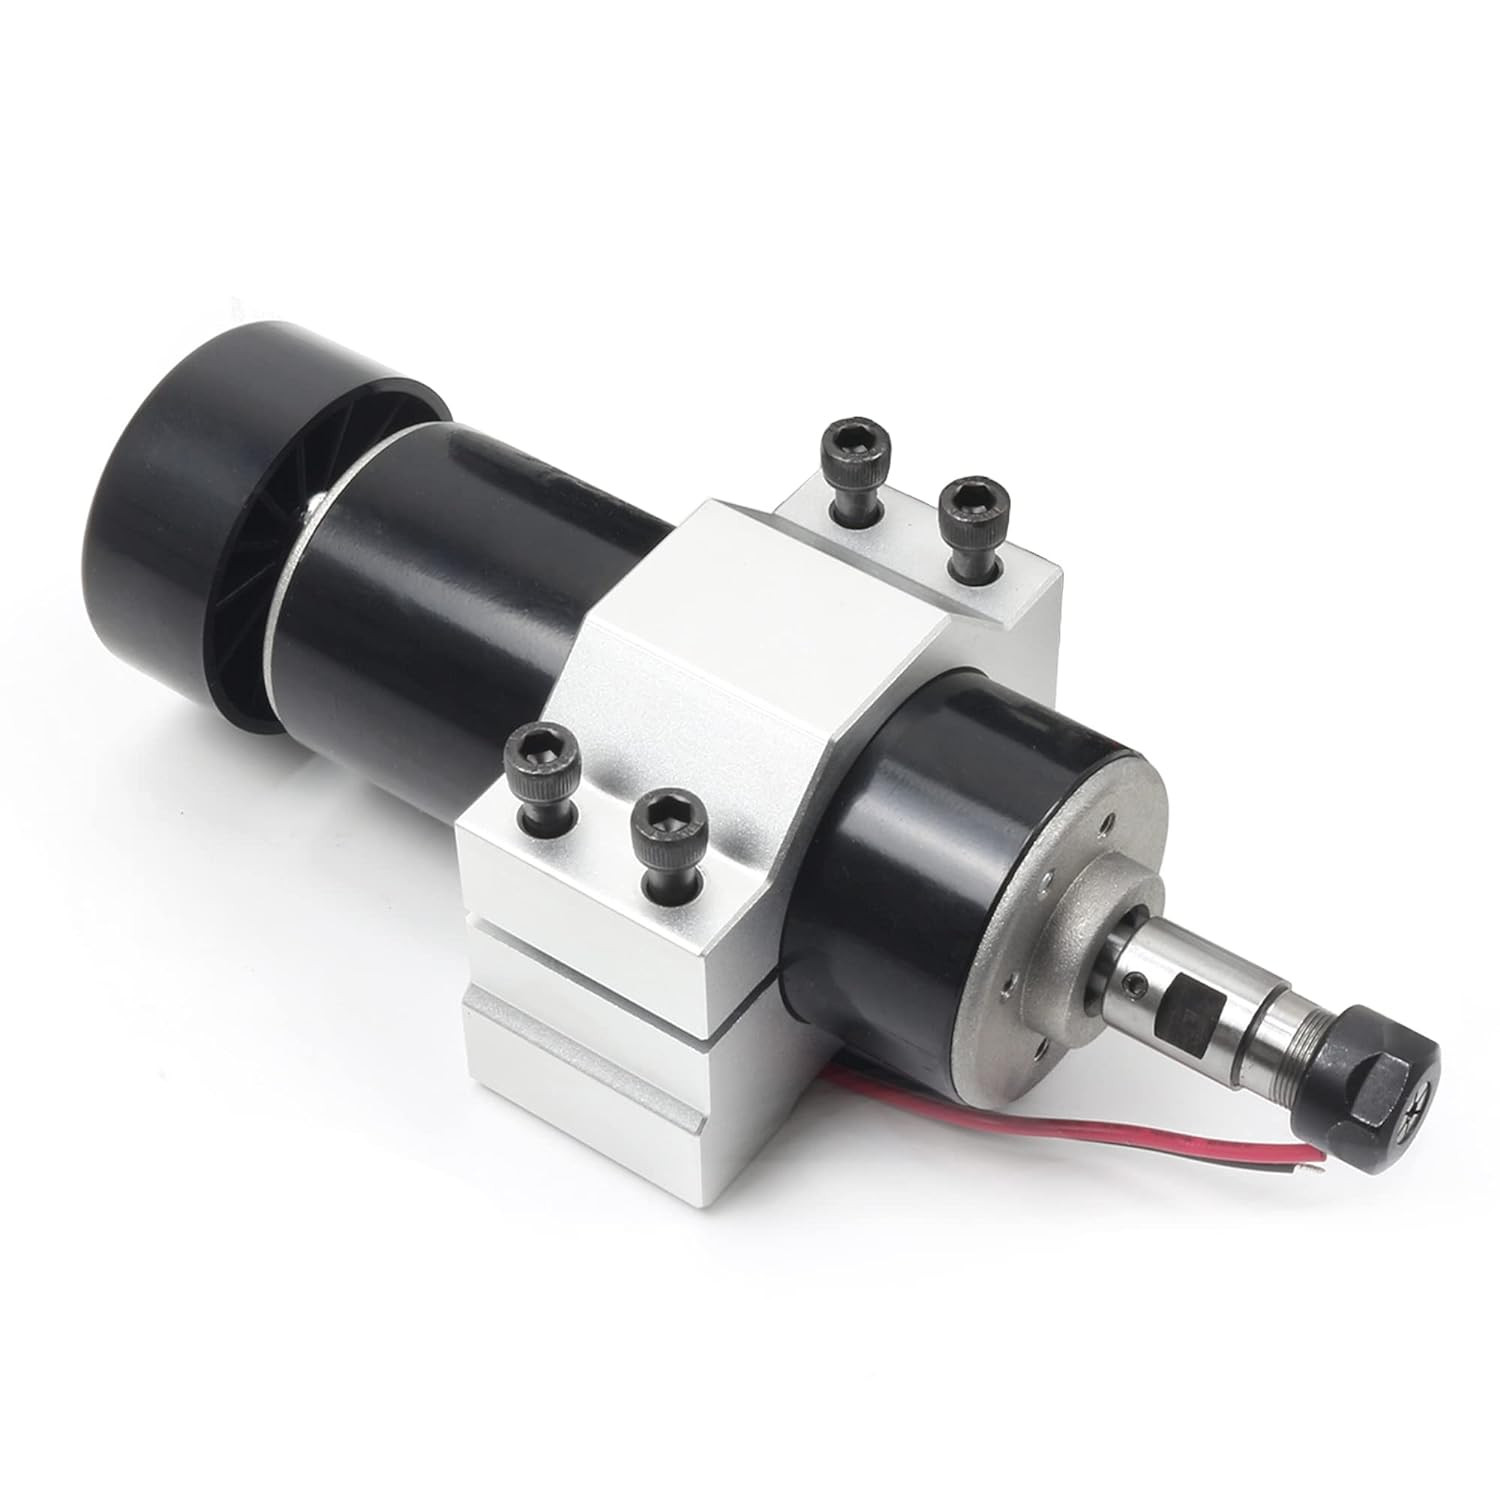 See more about Spindle motors